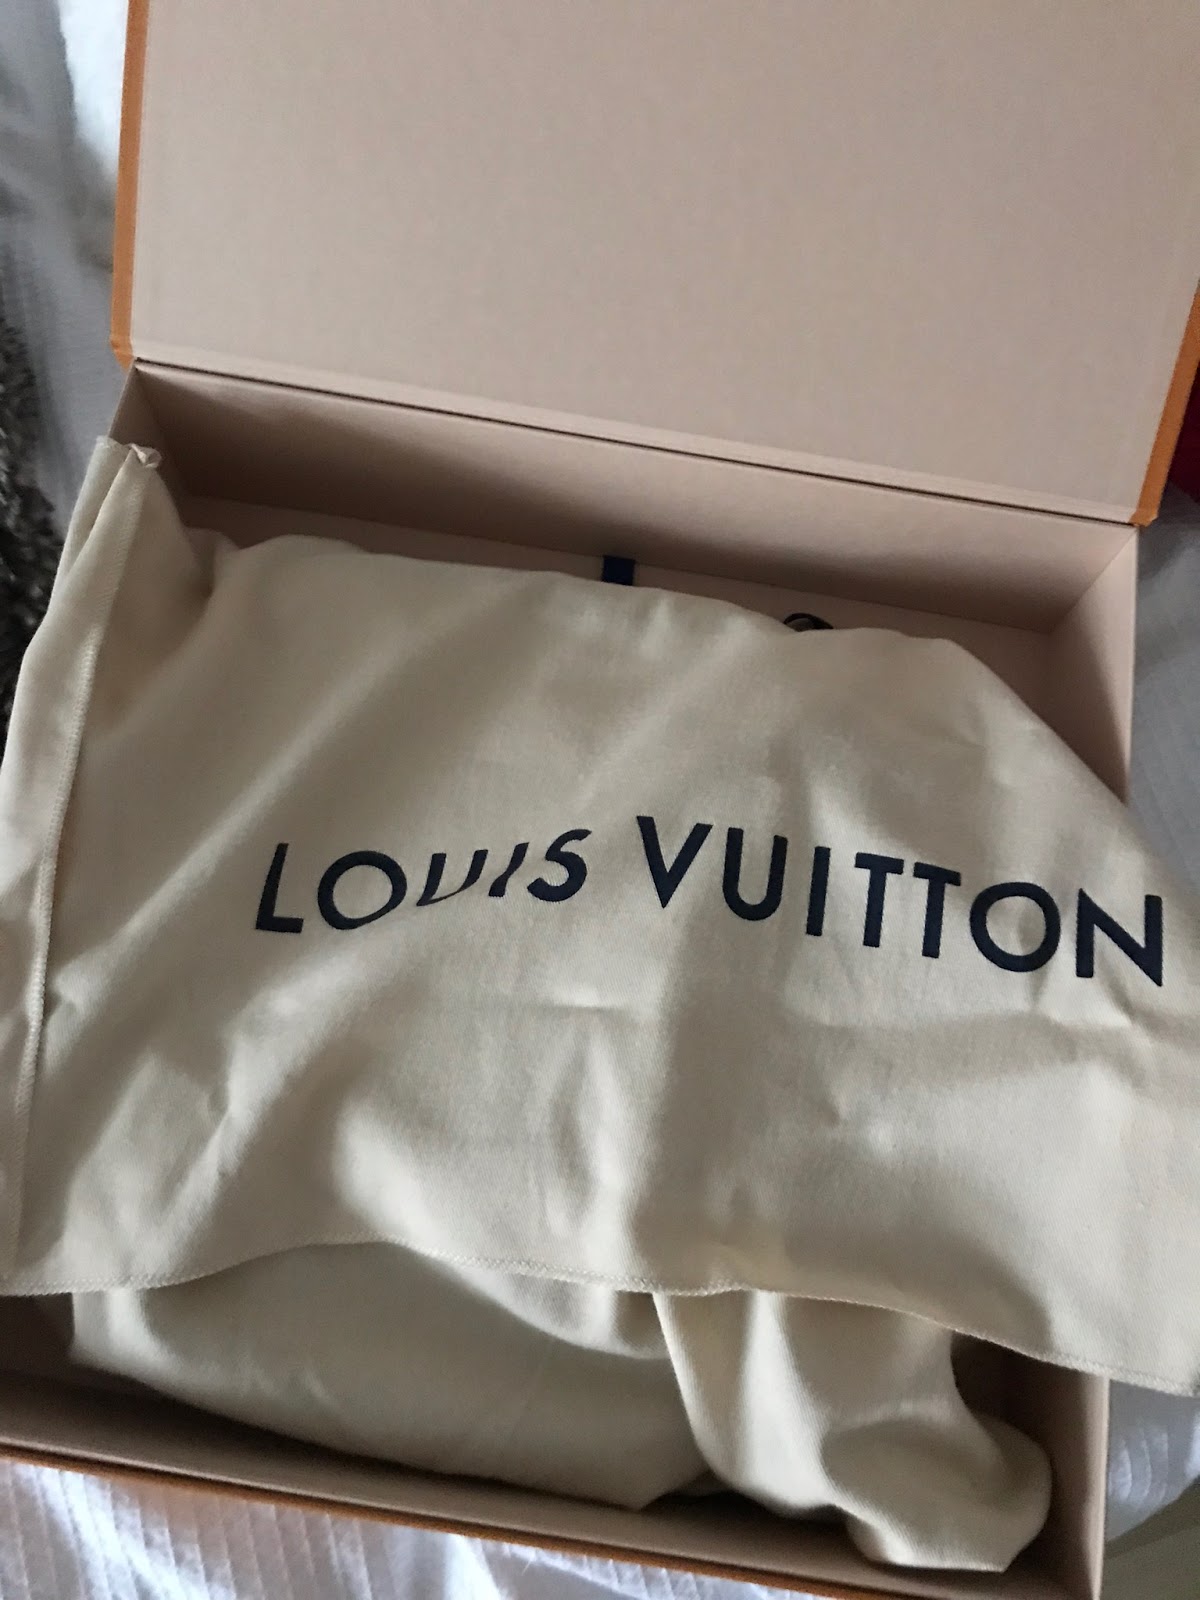 unboxing my first louis vuitton purchases🤎 #haul #unboxing #purse #ha, louis vuitton bag